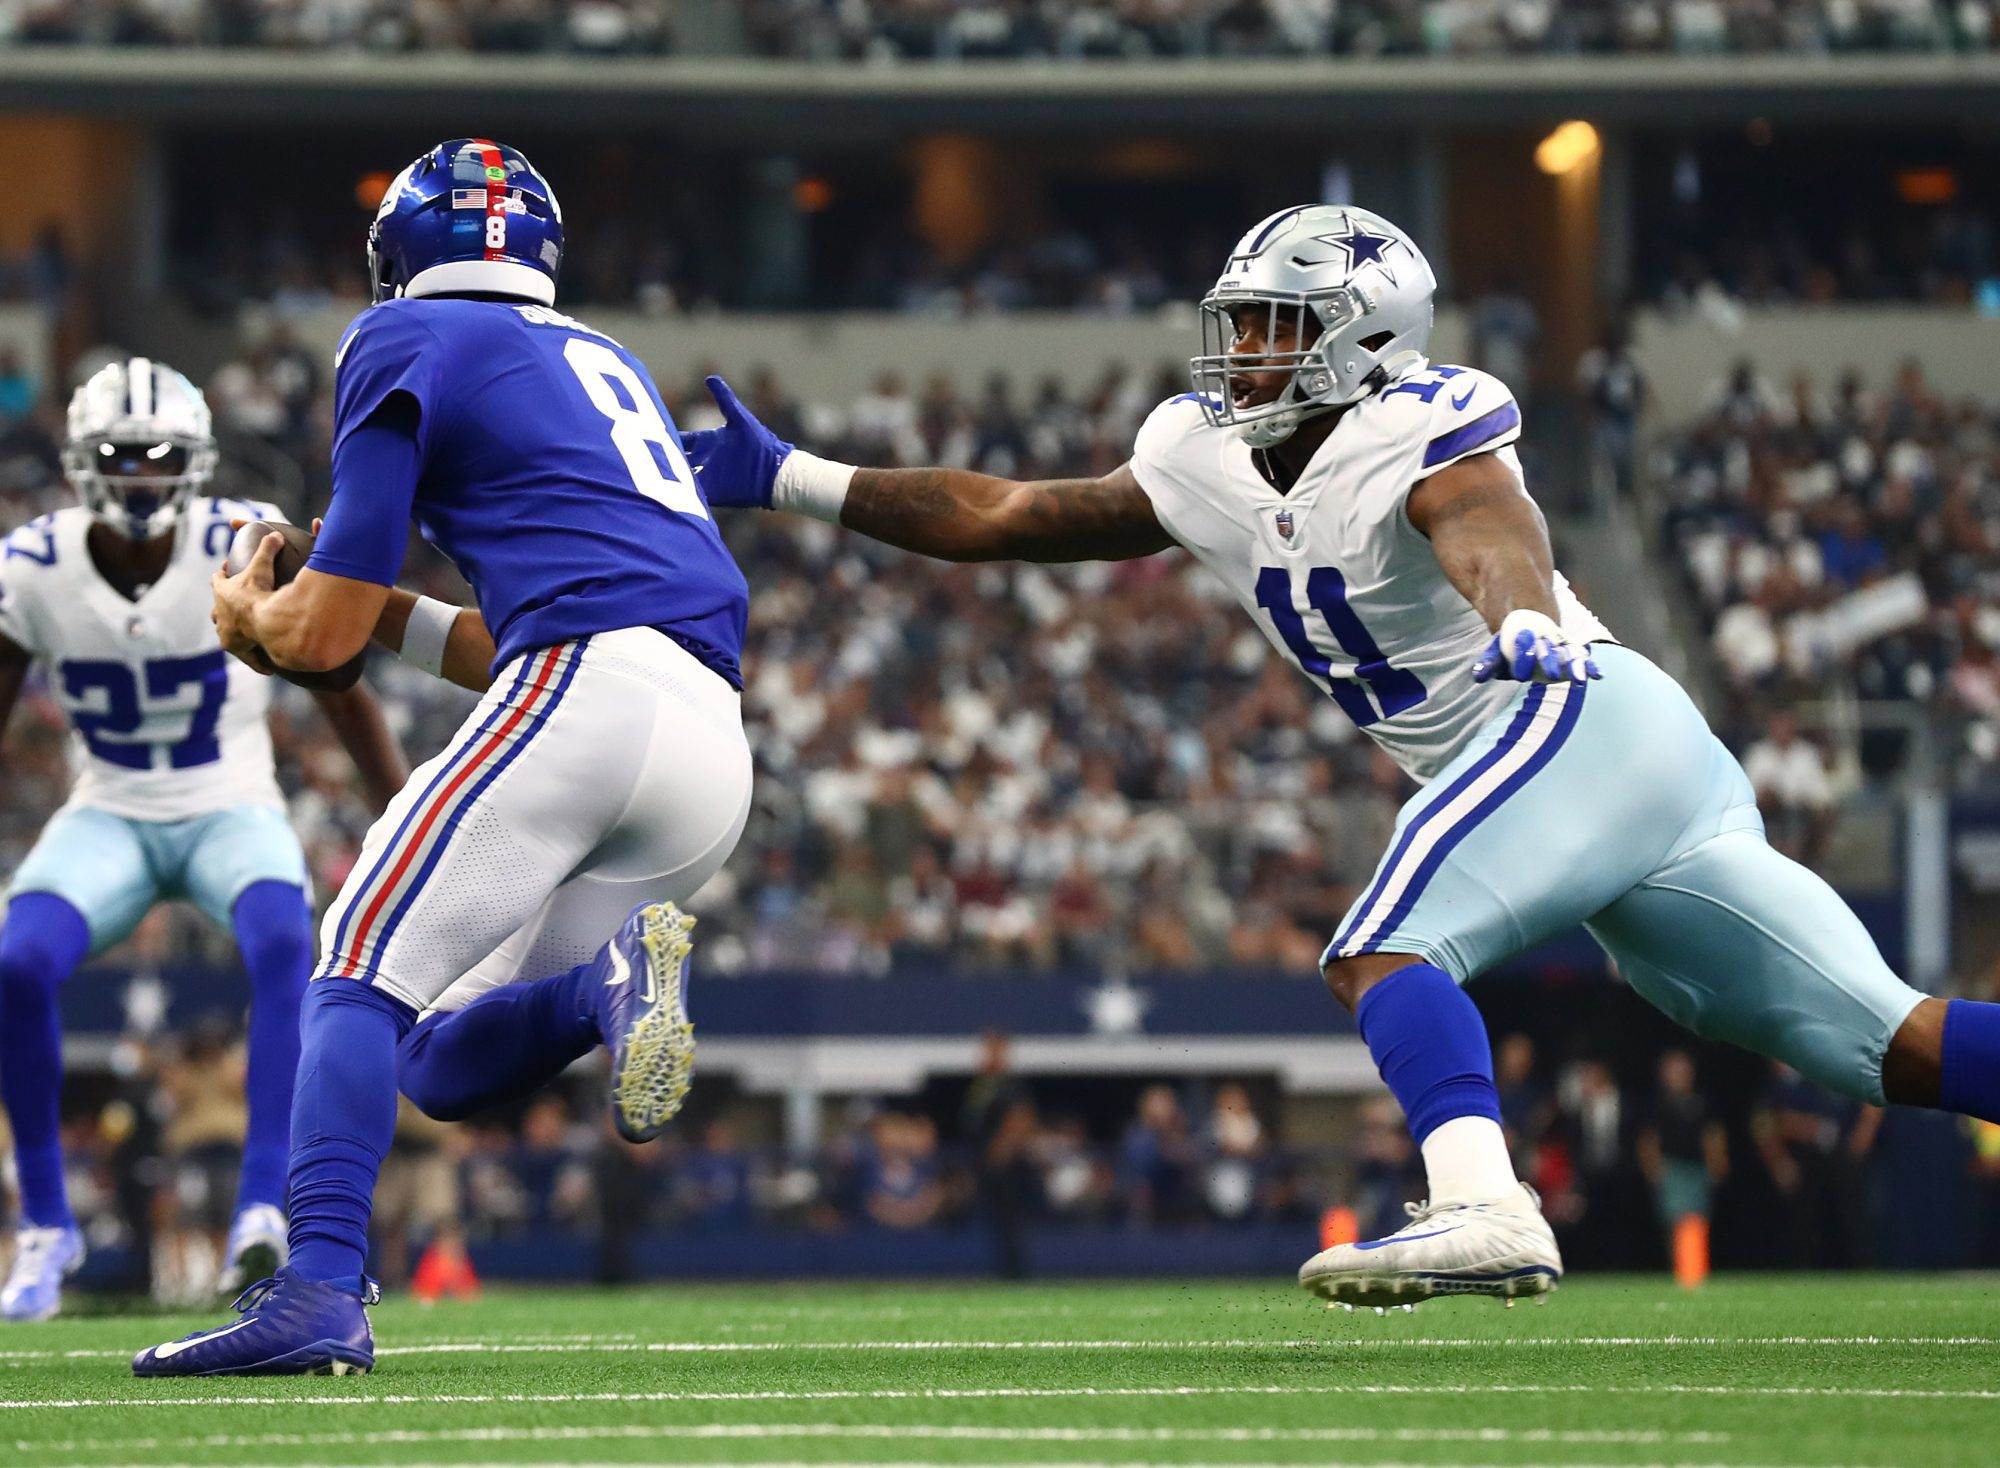 Where Was Micah Parsons in the Giants Game? [ITS]